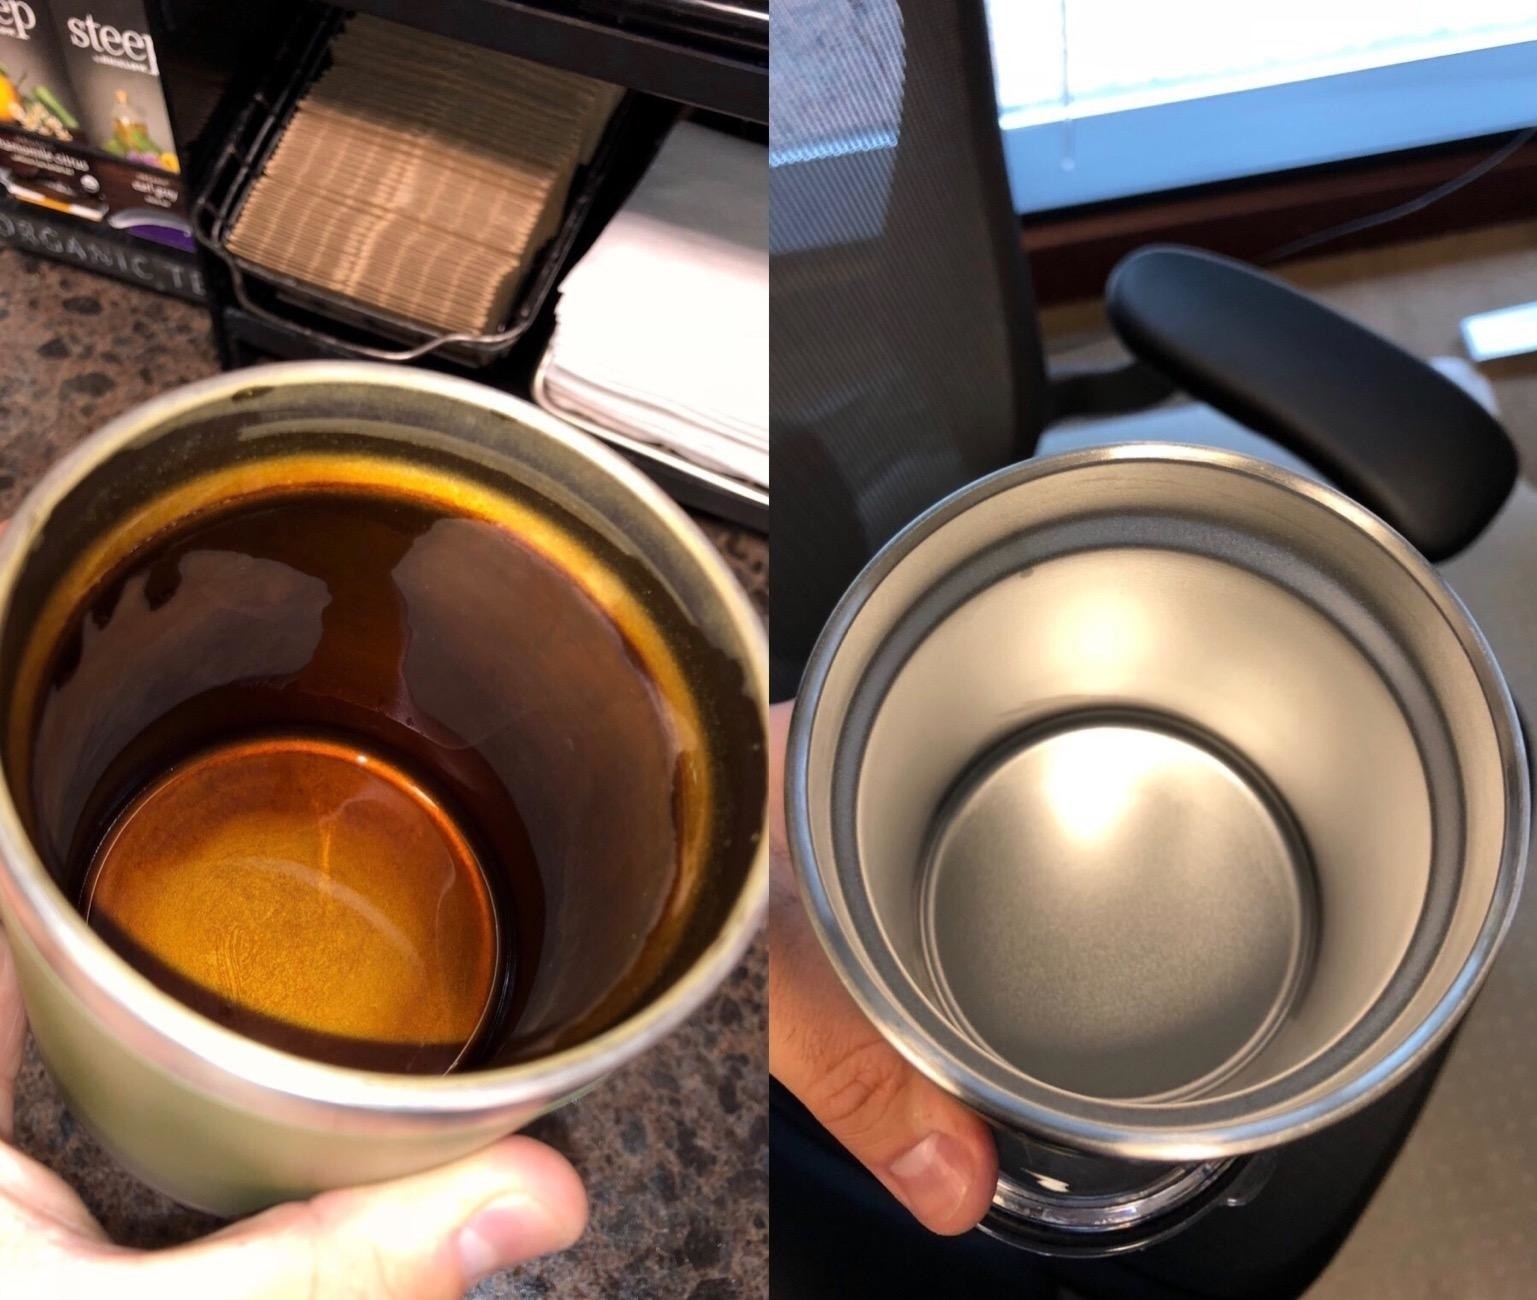 A stainless steel tumbler with baked-on coffee stains on the left, and the same cup totally clean on the right